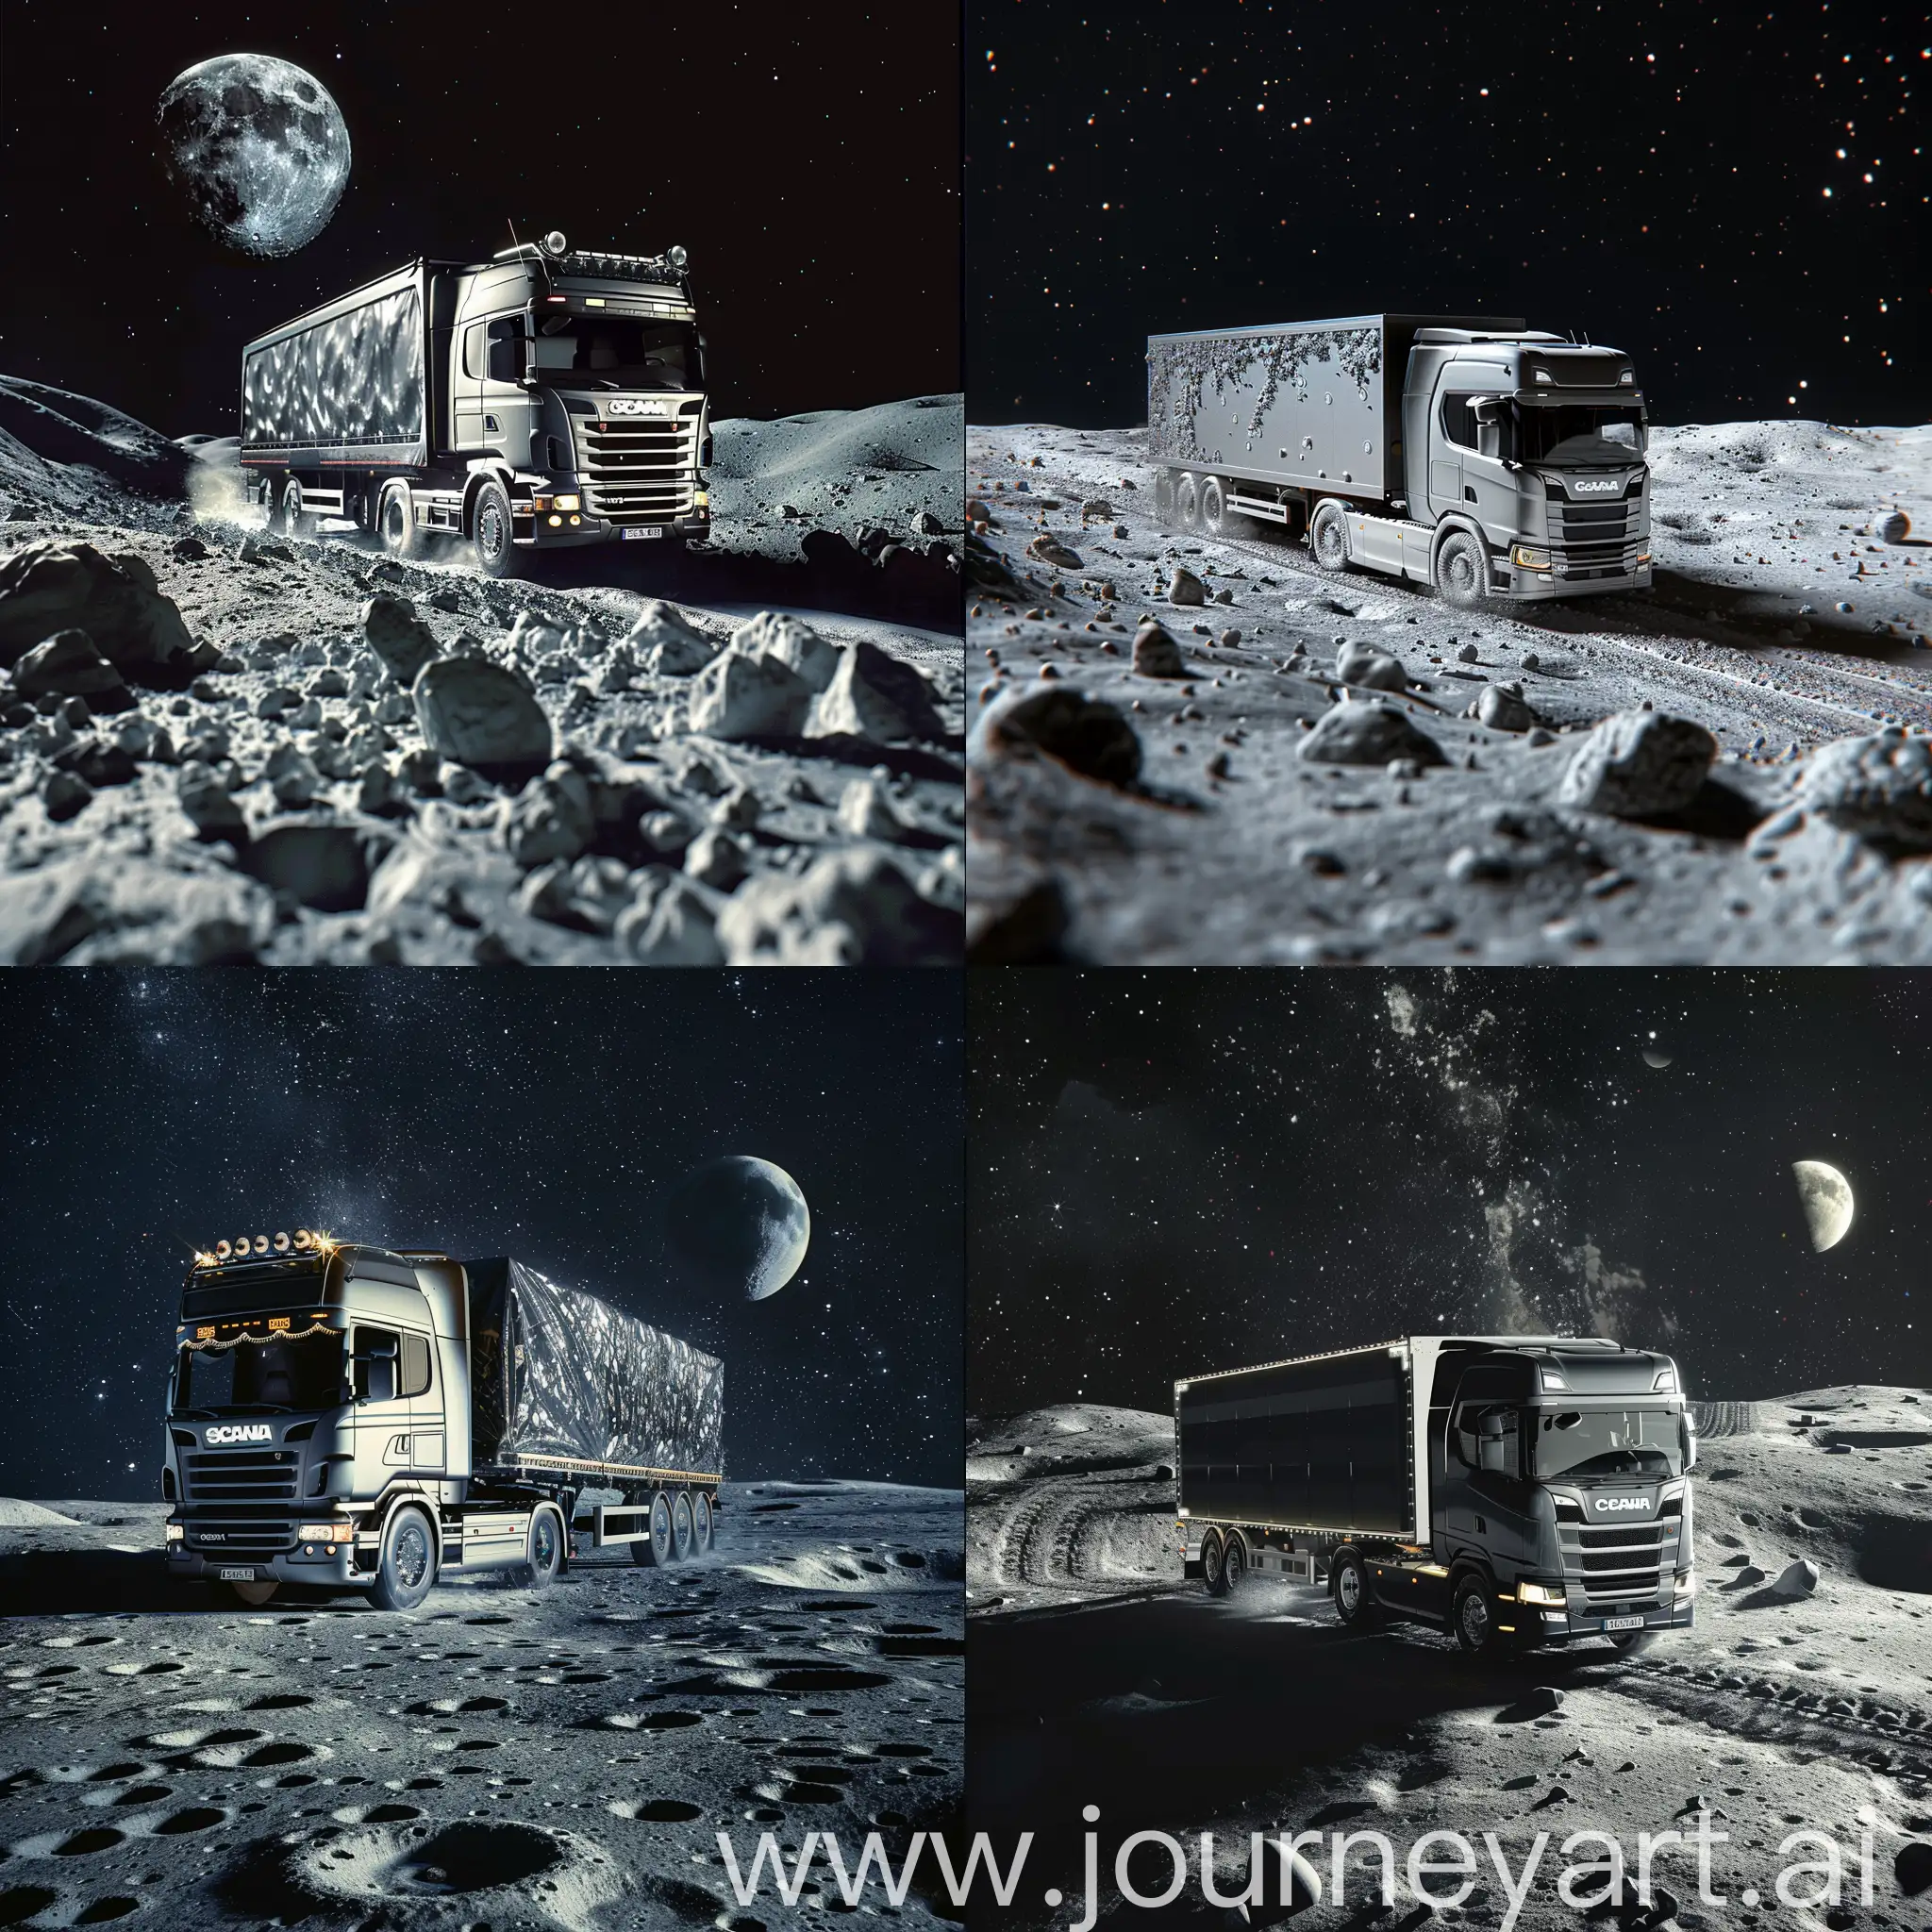 Scania truck delivering giant cargo on moon, hd, detailed, cool angle